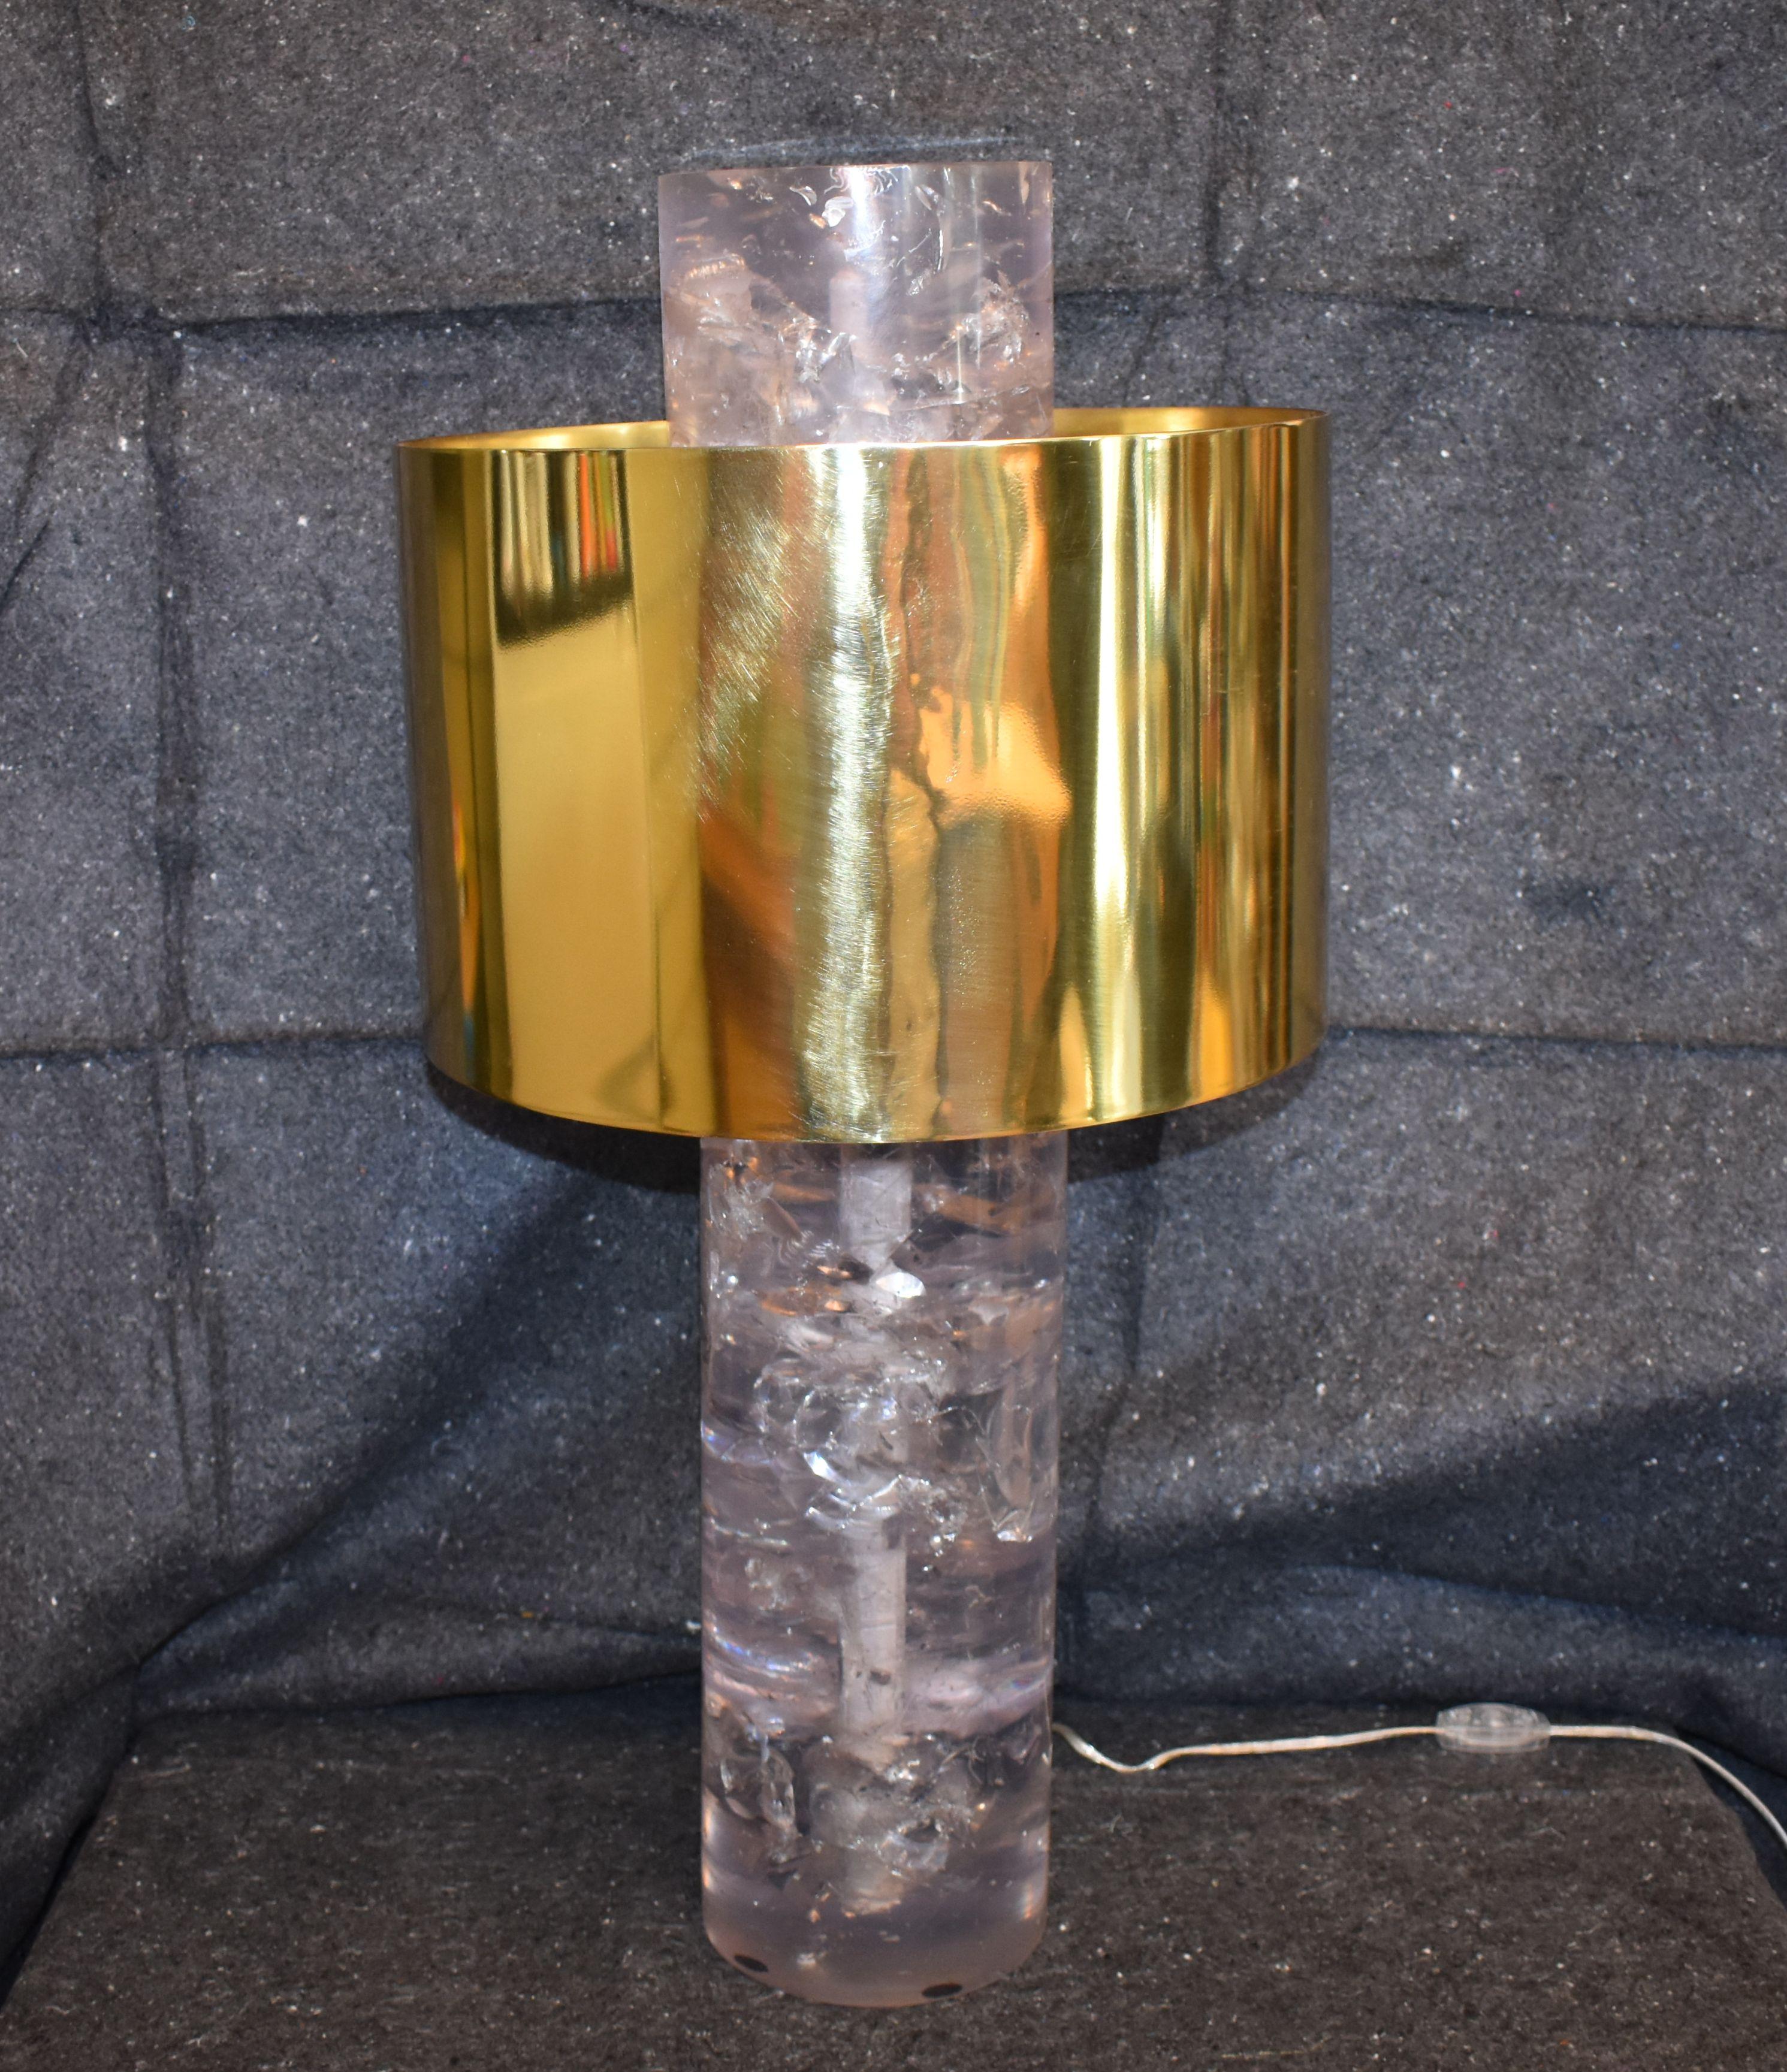 Single sculptural clear ice cracked resin table lamp with resin finial with brass shade.

Measures: Diameter of lamp without shade 6.5 inches.
 Height without shade 17.75 inches
 Height brass shade 10 inches.
  